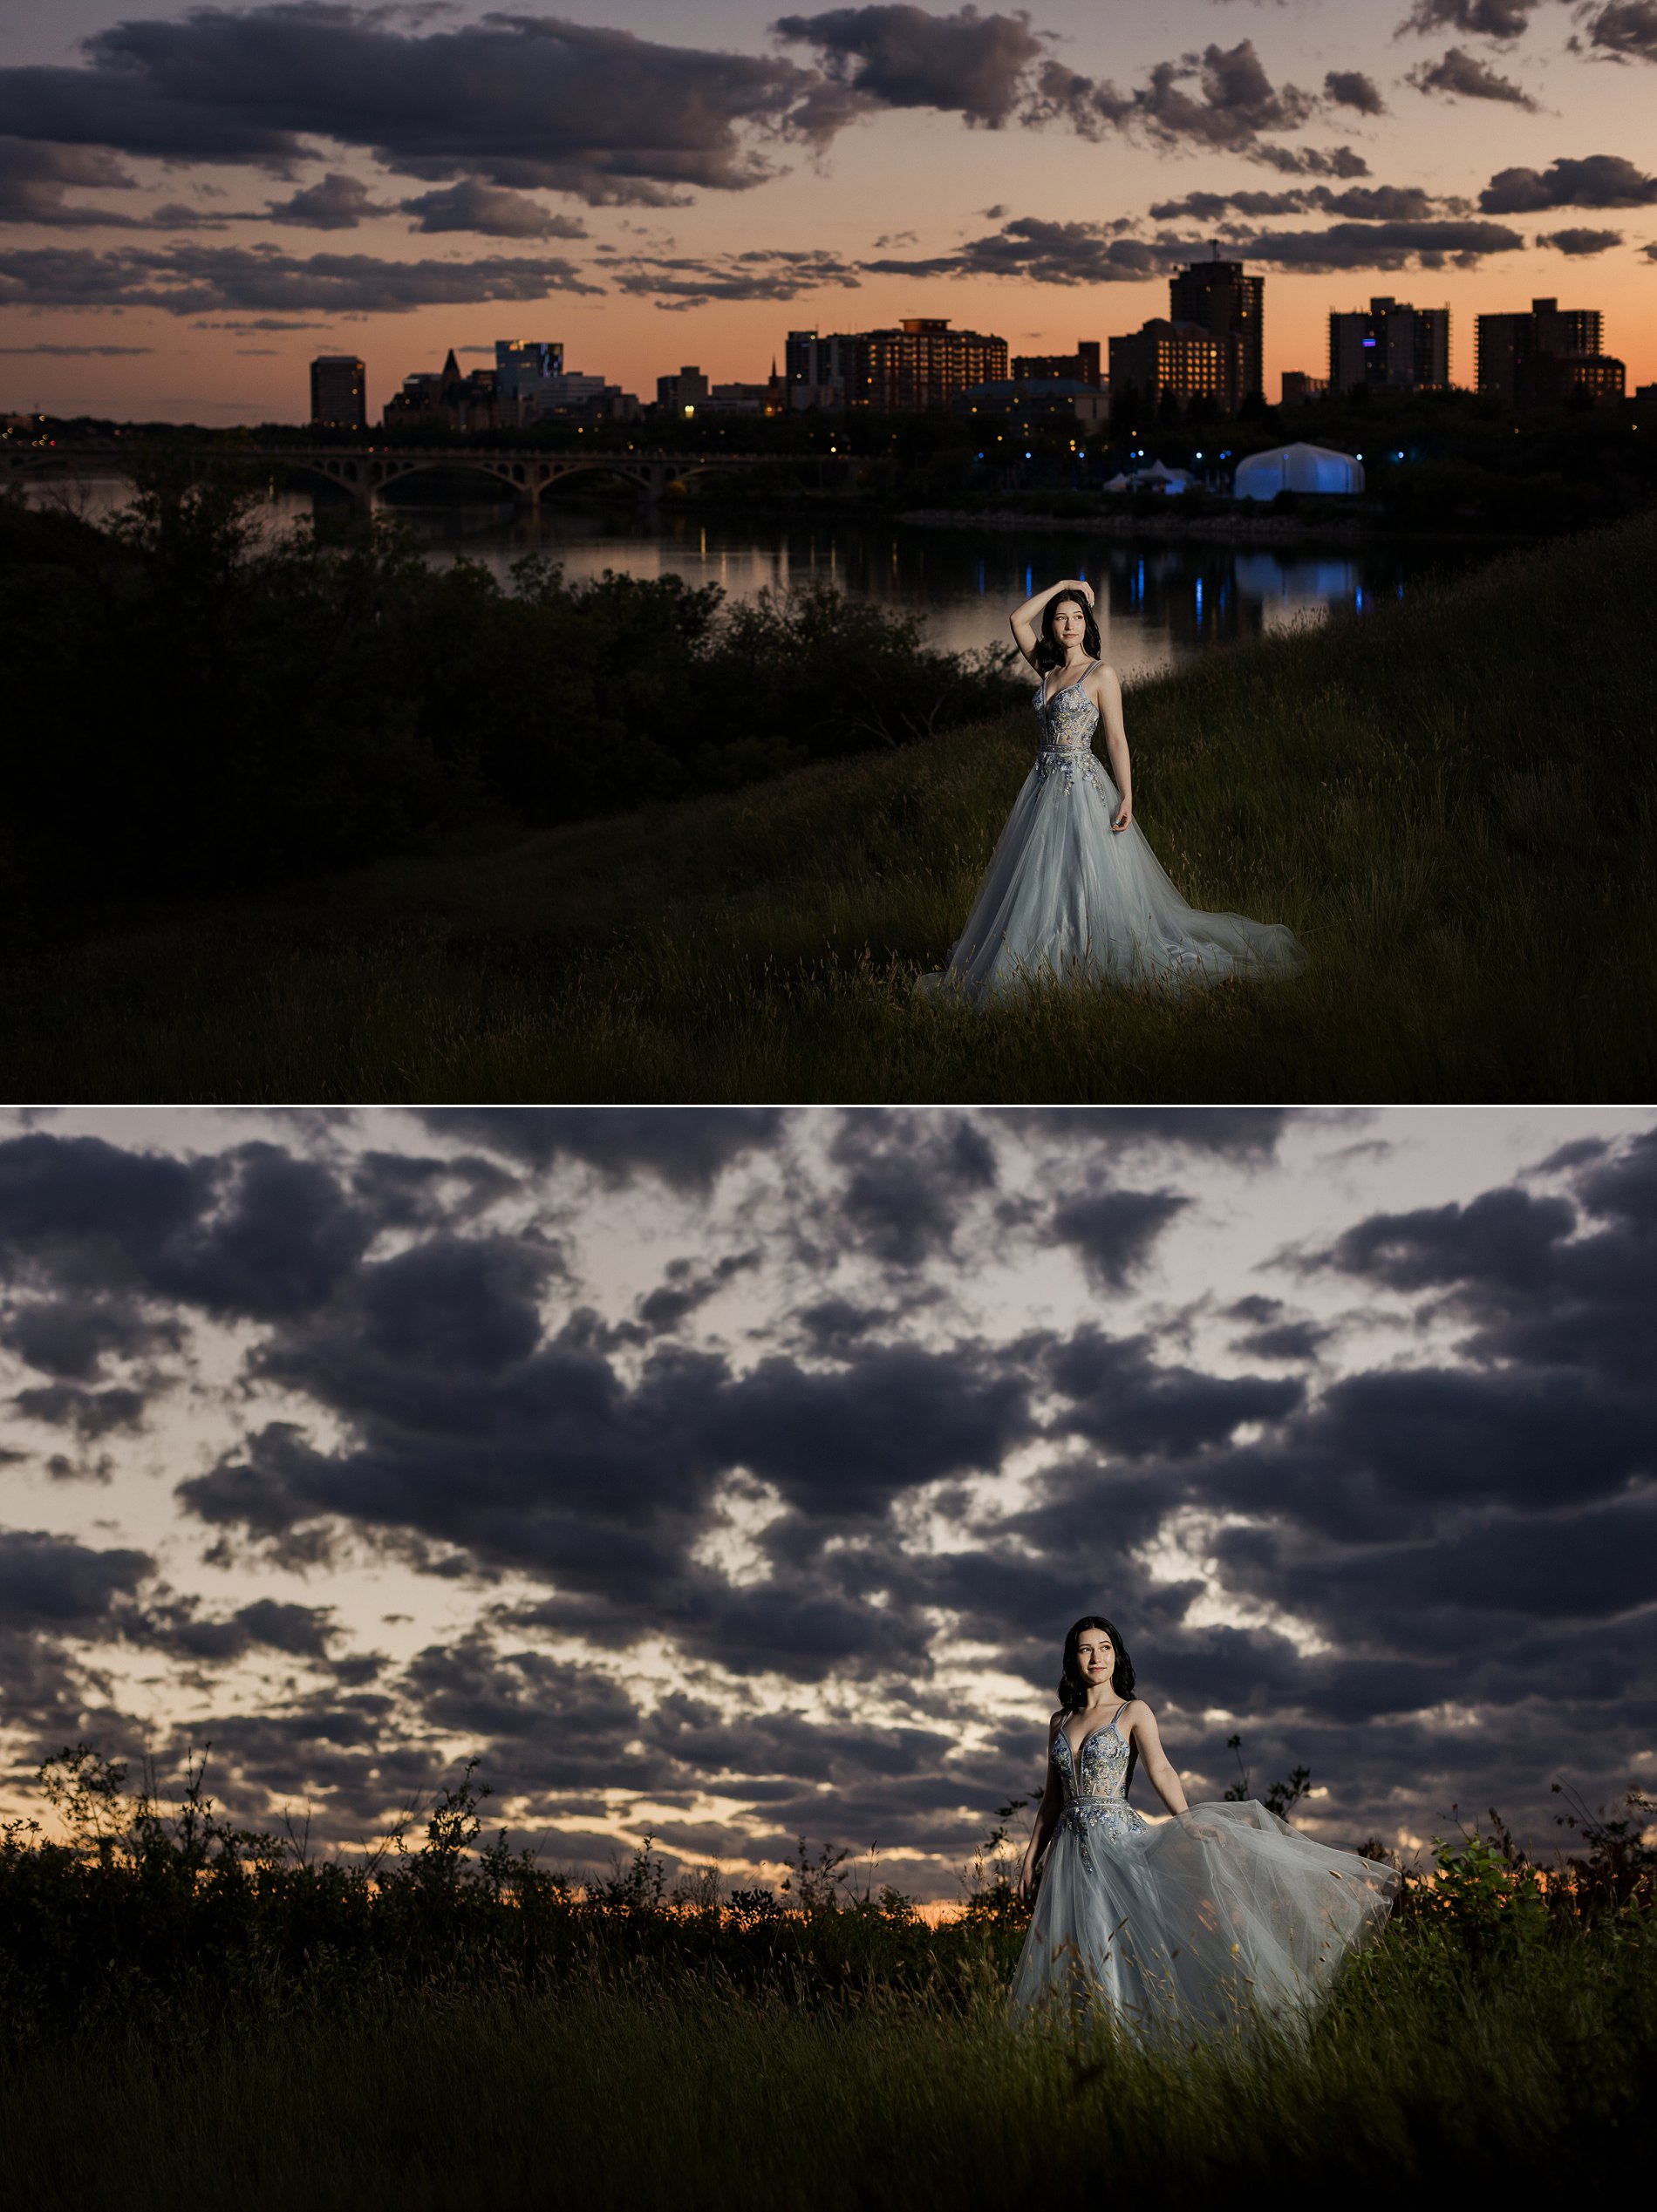 High school graduate poses for her portraits in a blue grad dress against the Saskatoon skyline at sunset.